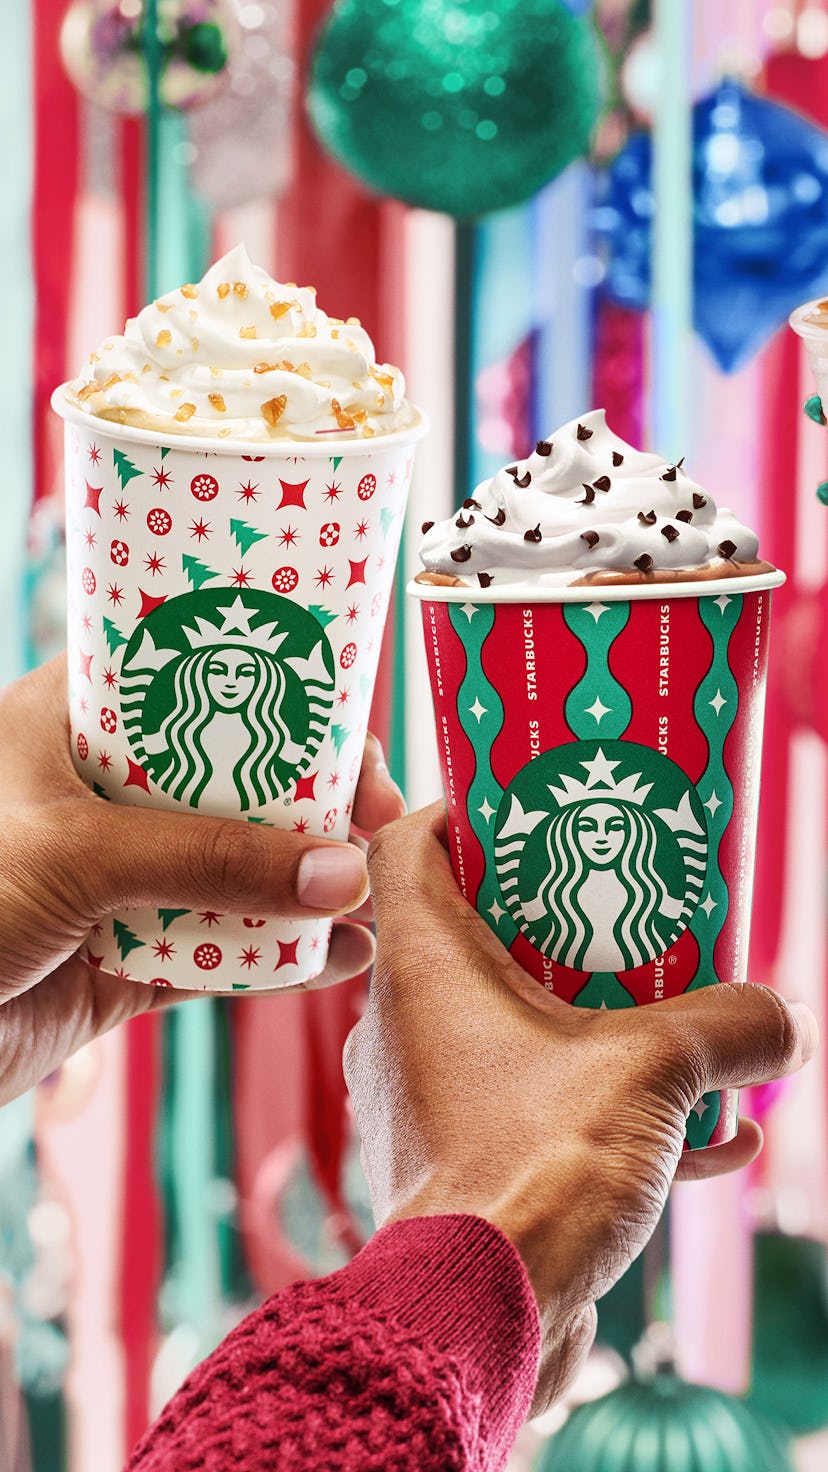 The 2022 Starbucks holiday drink lineup includes classic favorites like Peppermint Mocha latte and I...